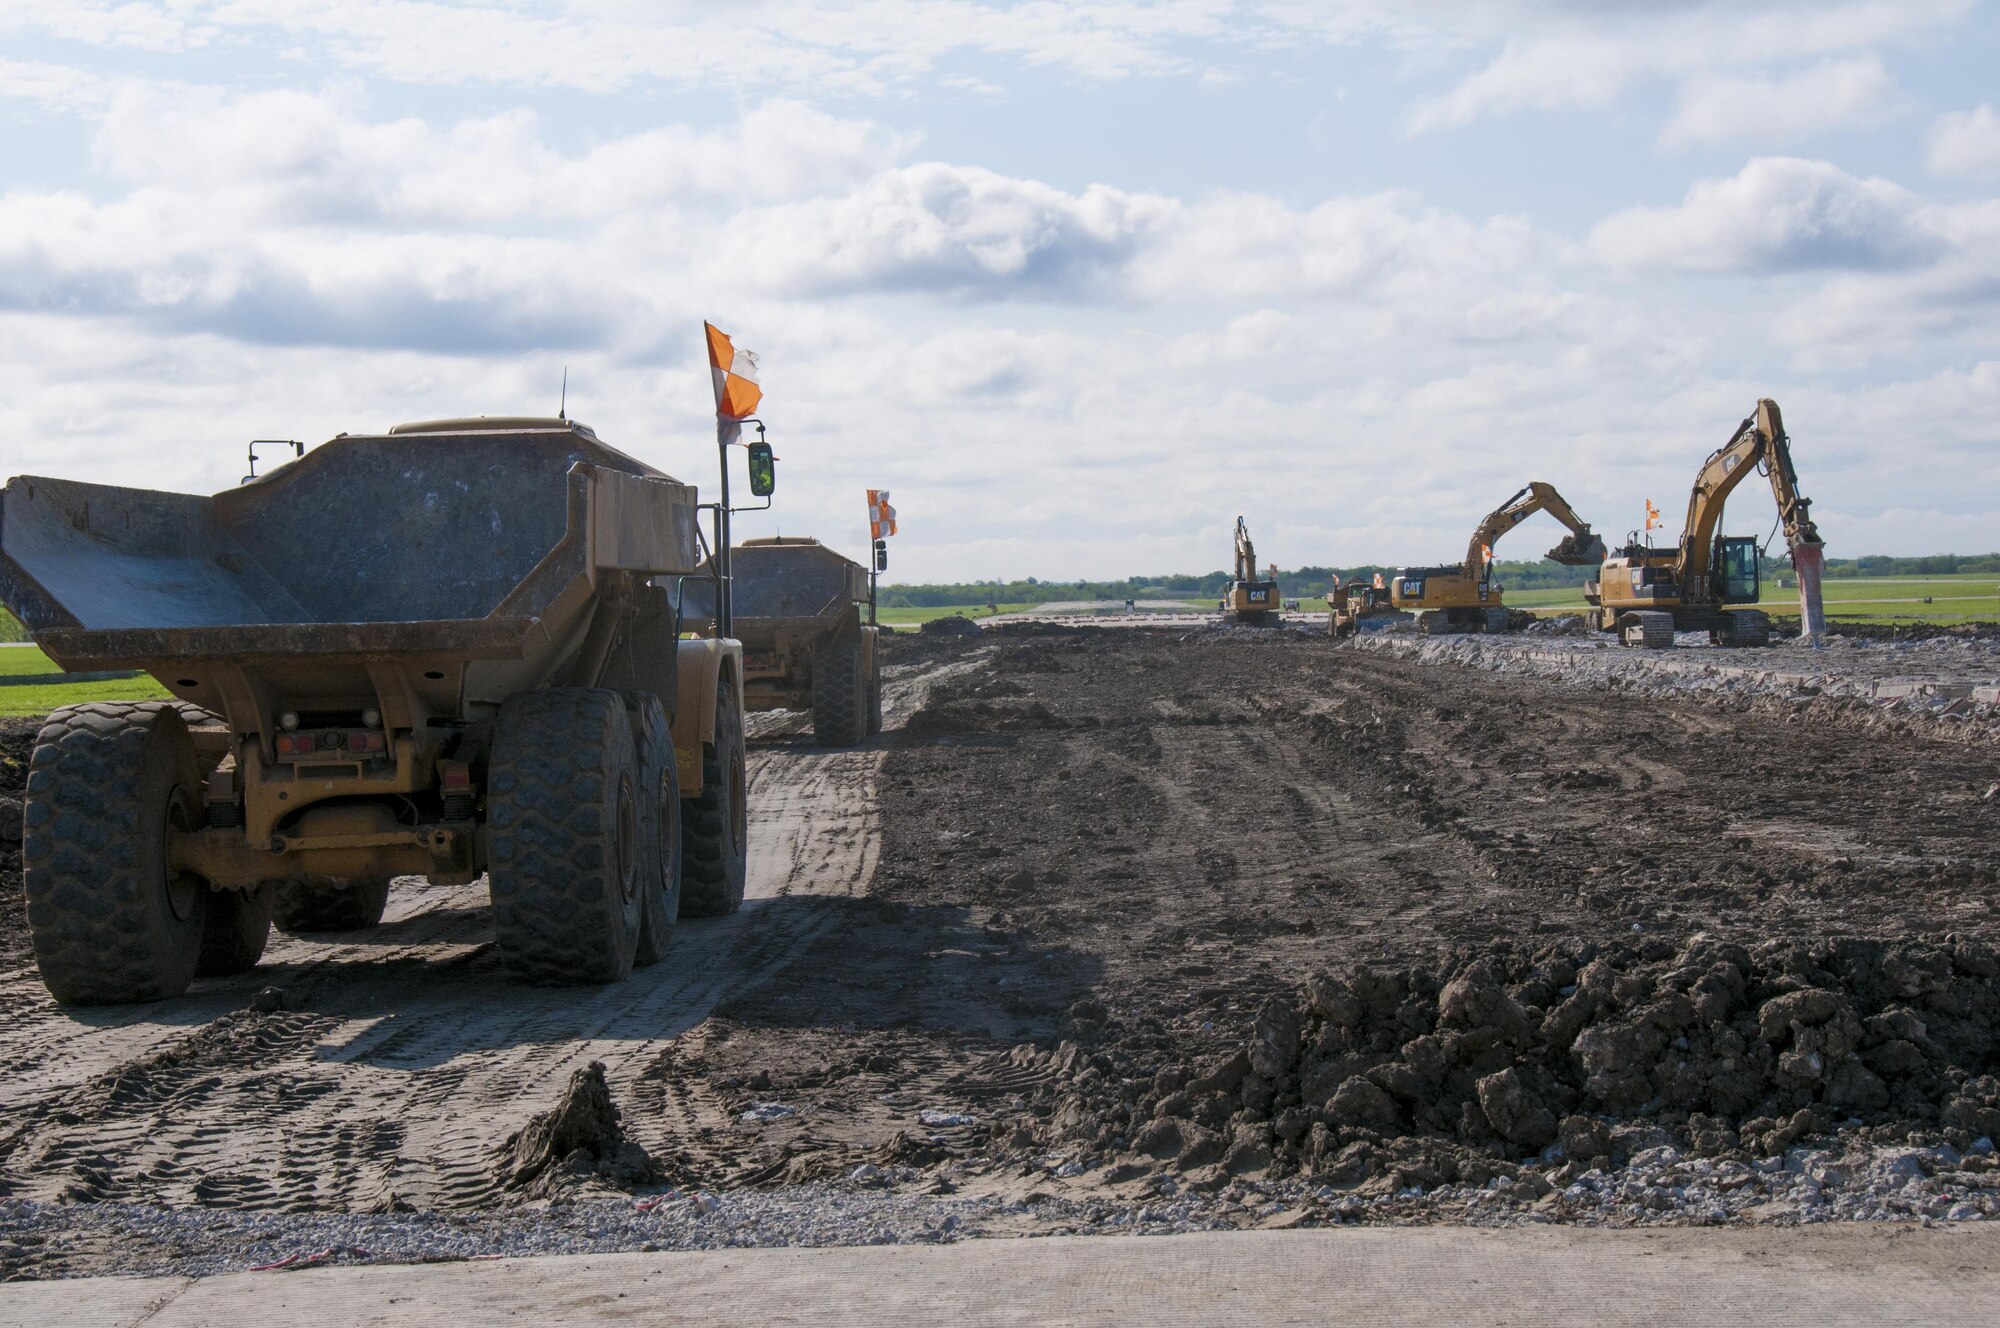 Construction vehicles move concrete away from the demolition zone on the northwest half of the runway at Forbes Field Air National Guard Base, Topeka, Kan. April 20, 2017. Since February 2017, Forbes Field and local contractors have been performing a major construction overhaul on the runway to improve flight operations and ensure the safety of Airmen and aircraft alike.